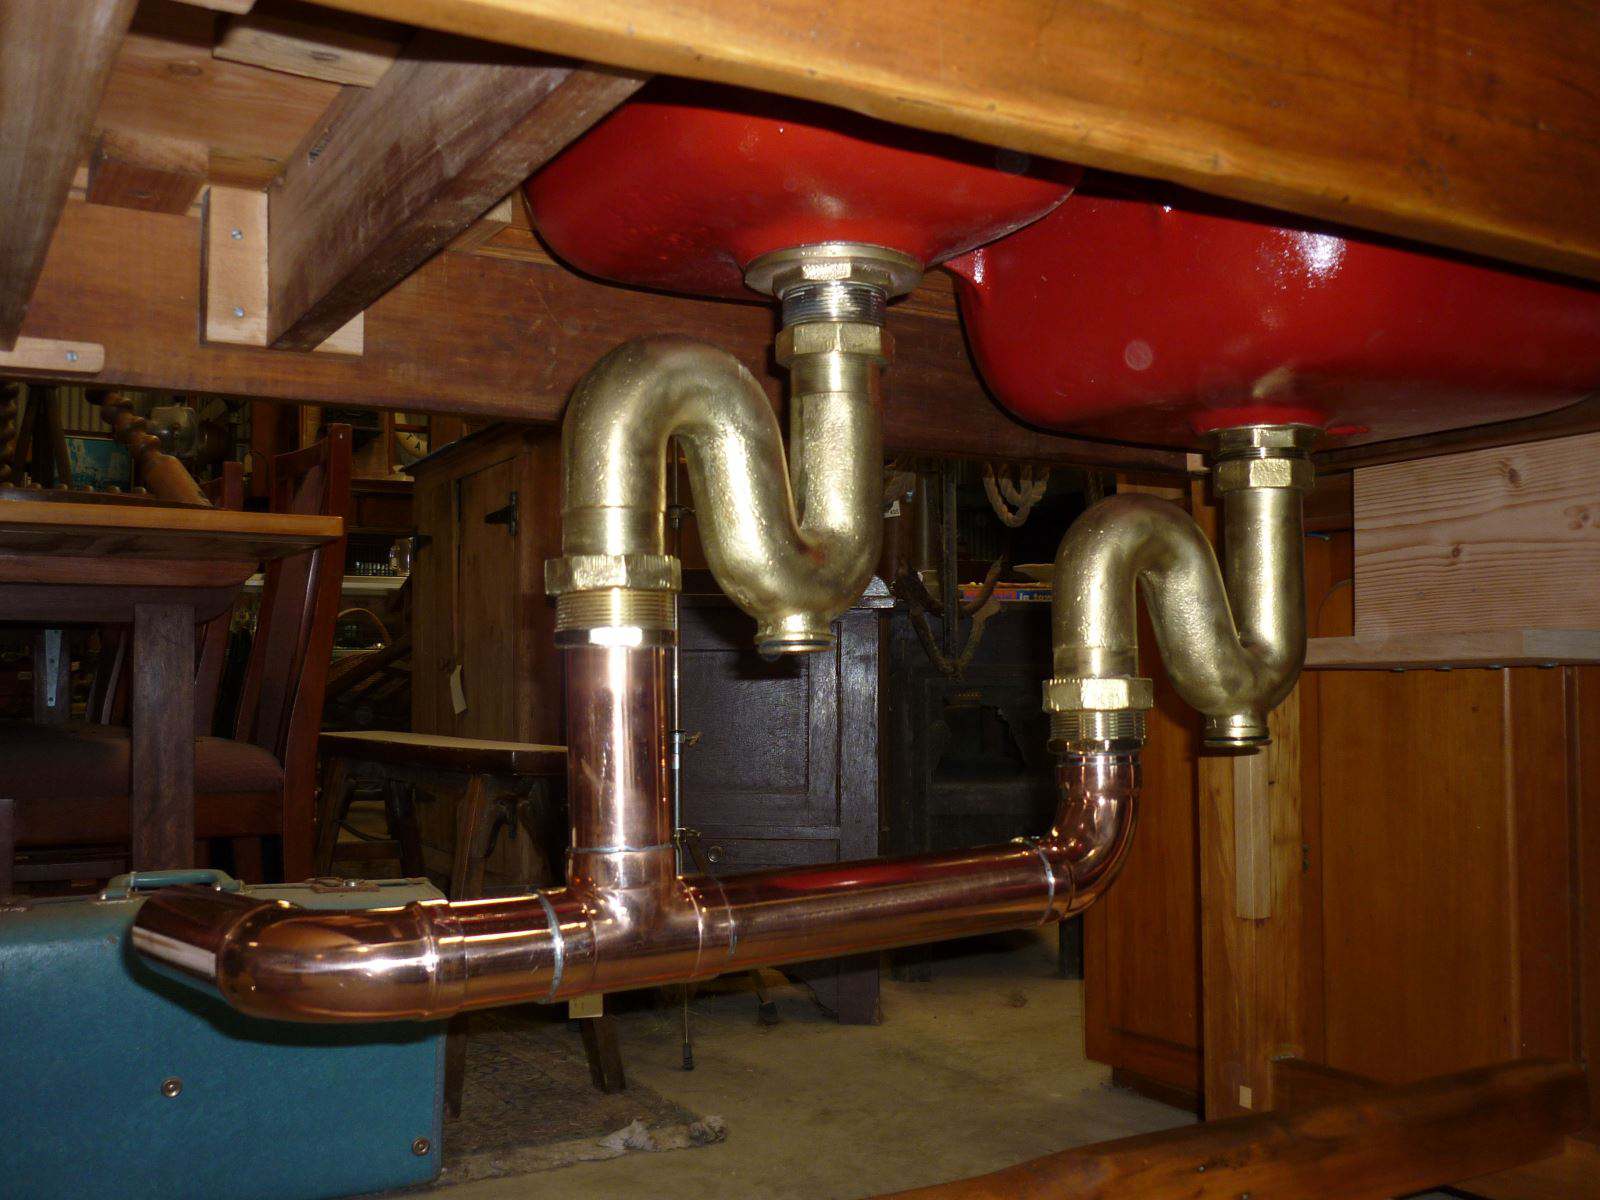 HRA  Workshop Copper Plumbing Made Up to Suit Restored Brass Traps & Sink